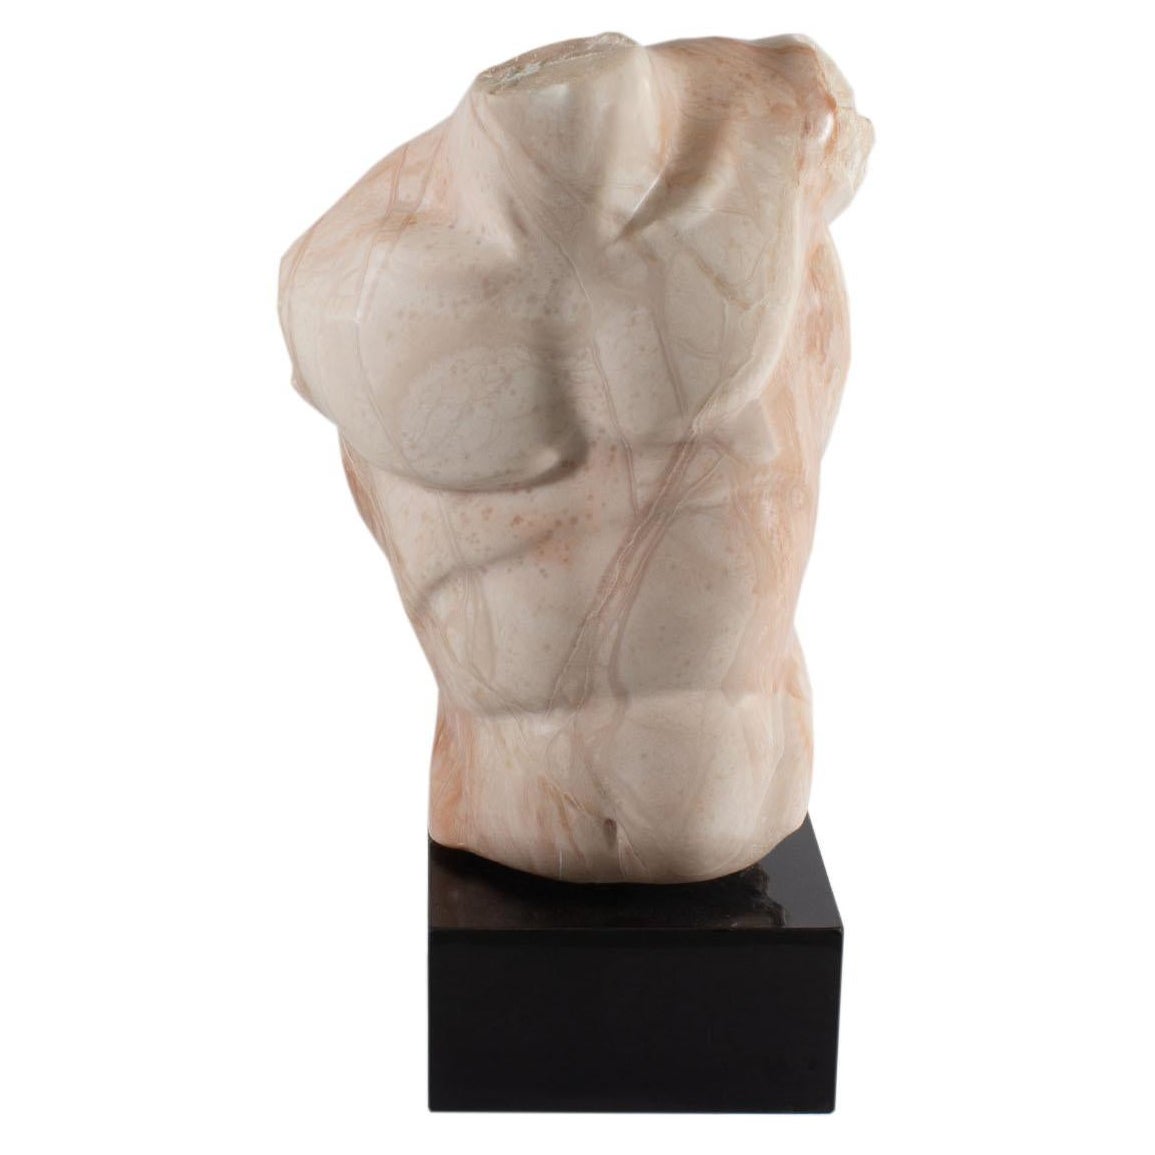 Bryan Ross Signed Stone Sculpture of a Torso 